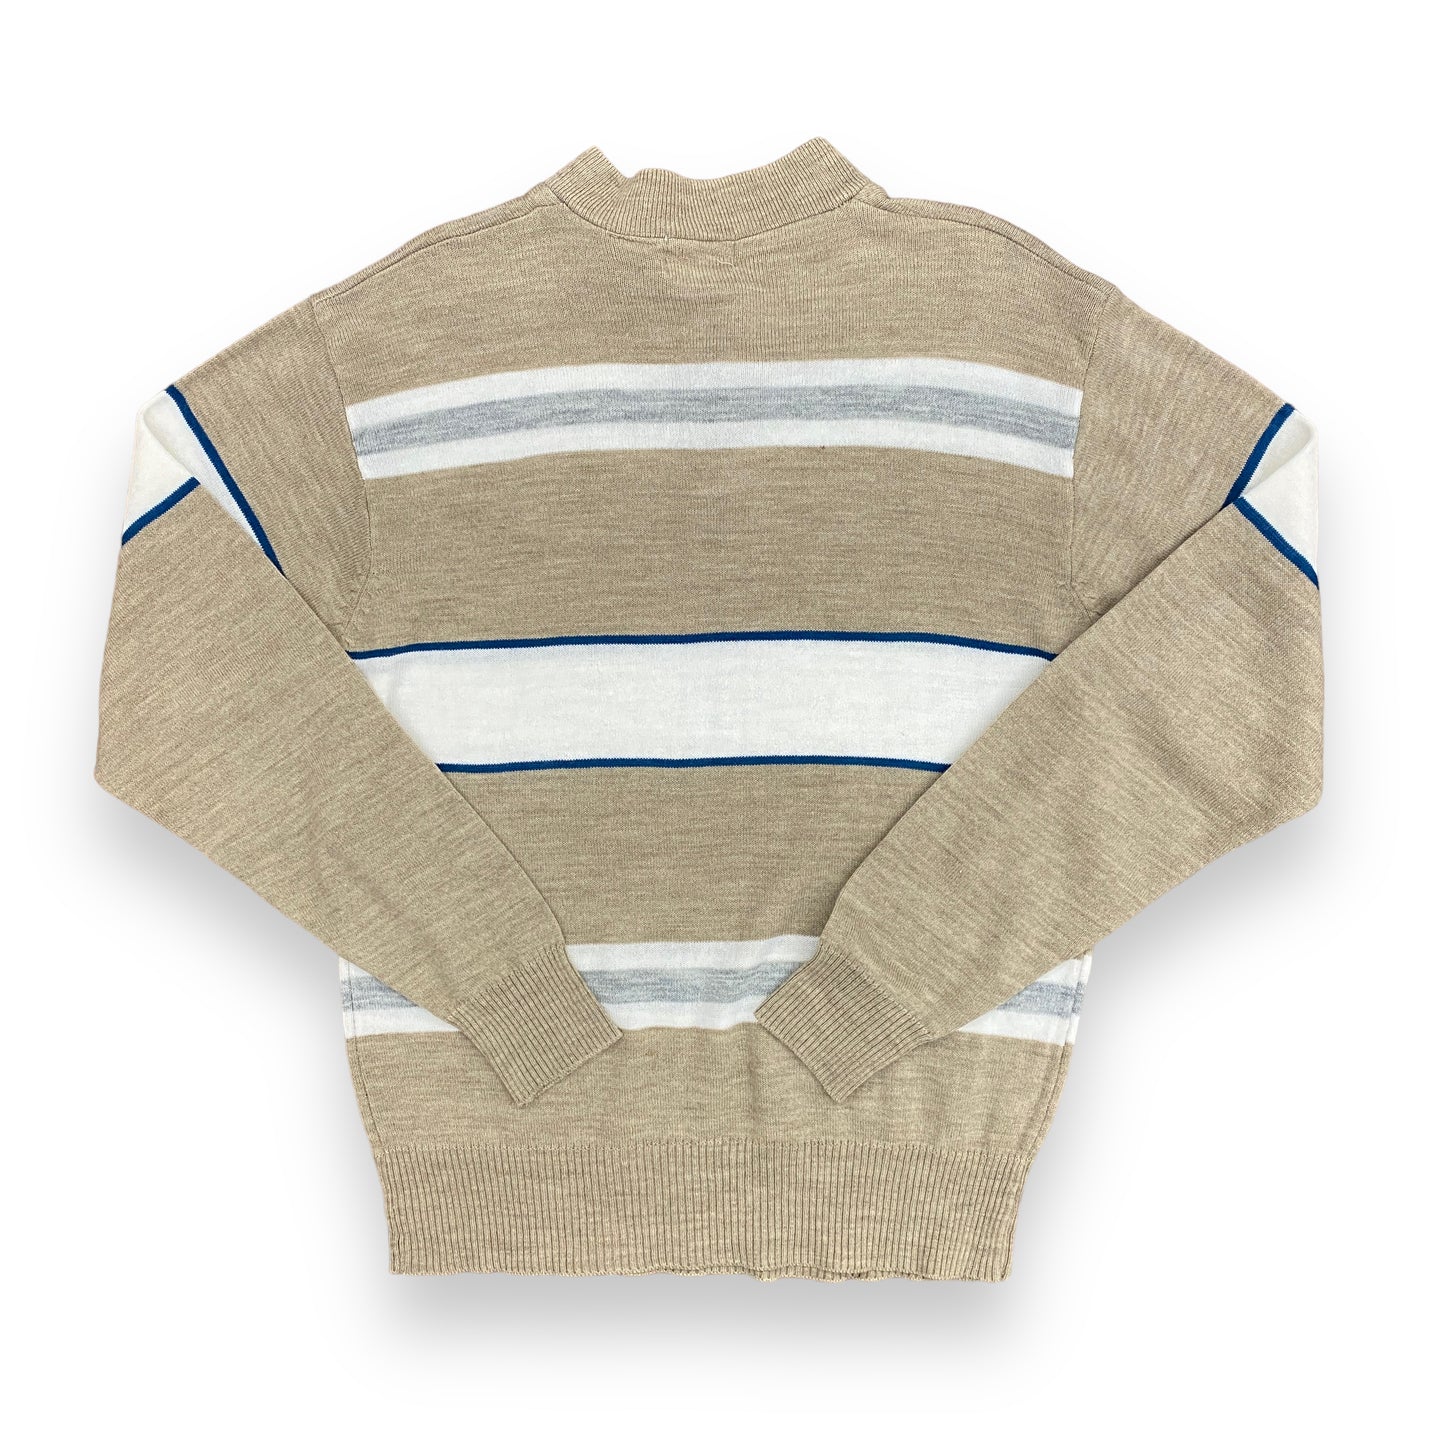 1980s Striped Wool Blend Henley Sweater - Size Large